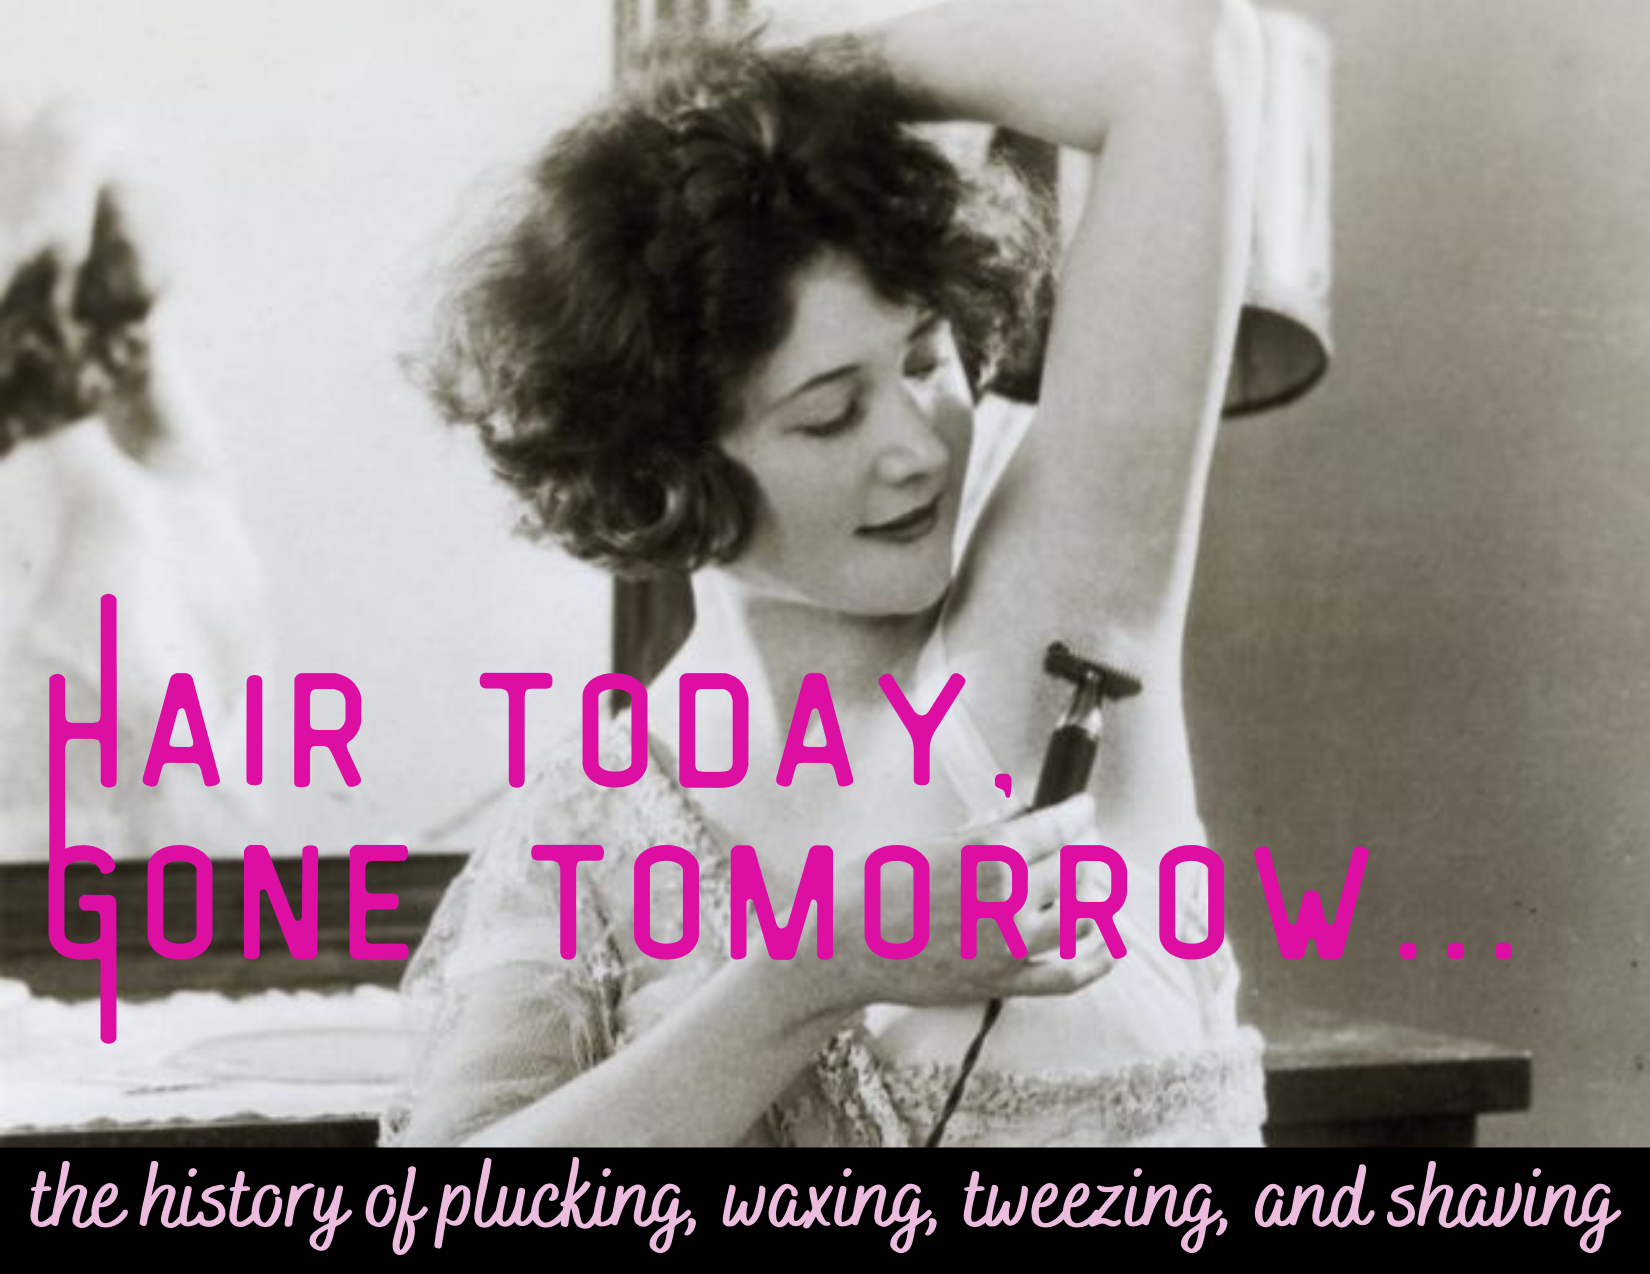 Hair Today, Gone Tomorrow...the history of plucking, waxing, tweezing, and shaving